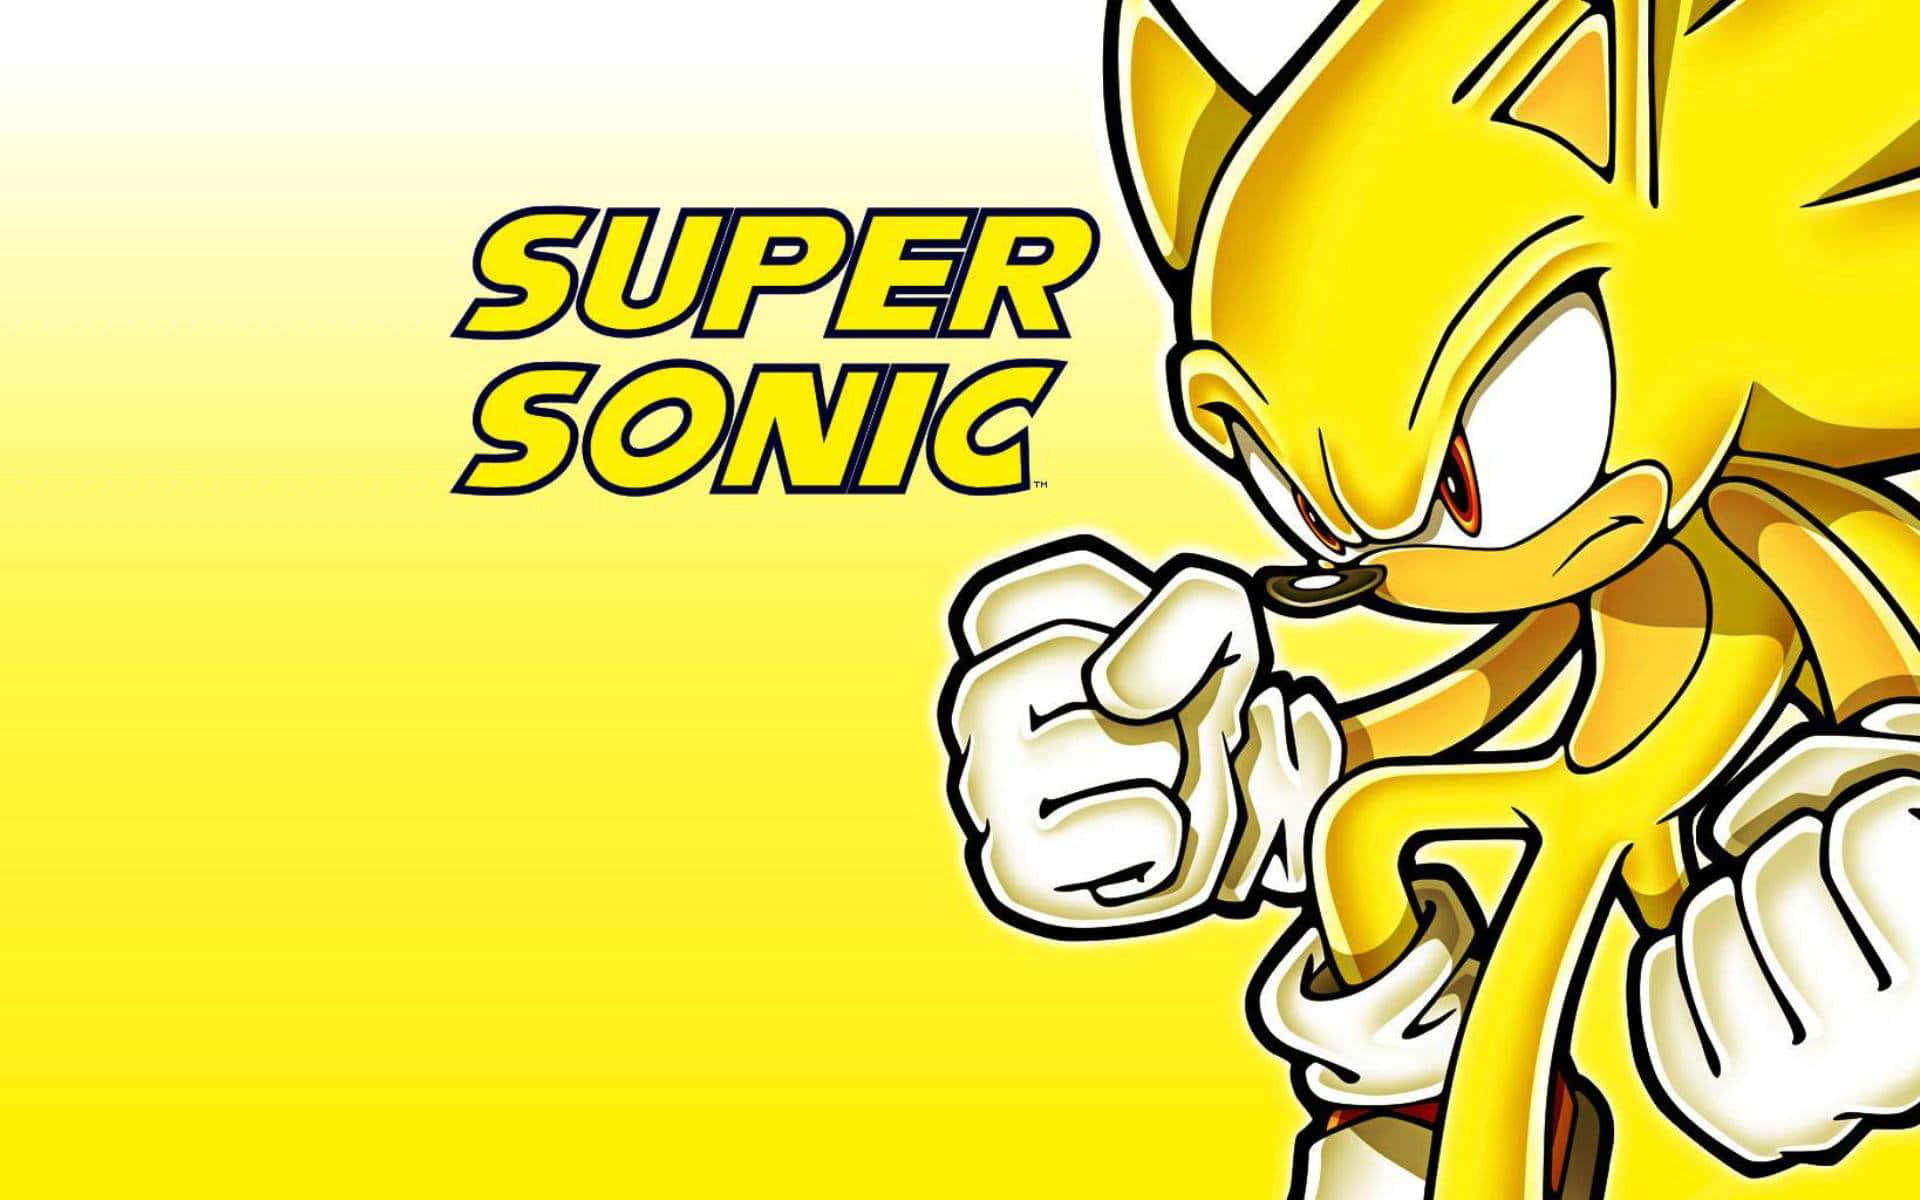 Play Super Sonic: The Hedgehog and save the world Wallpaper